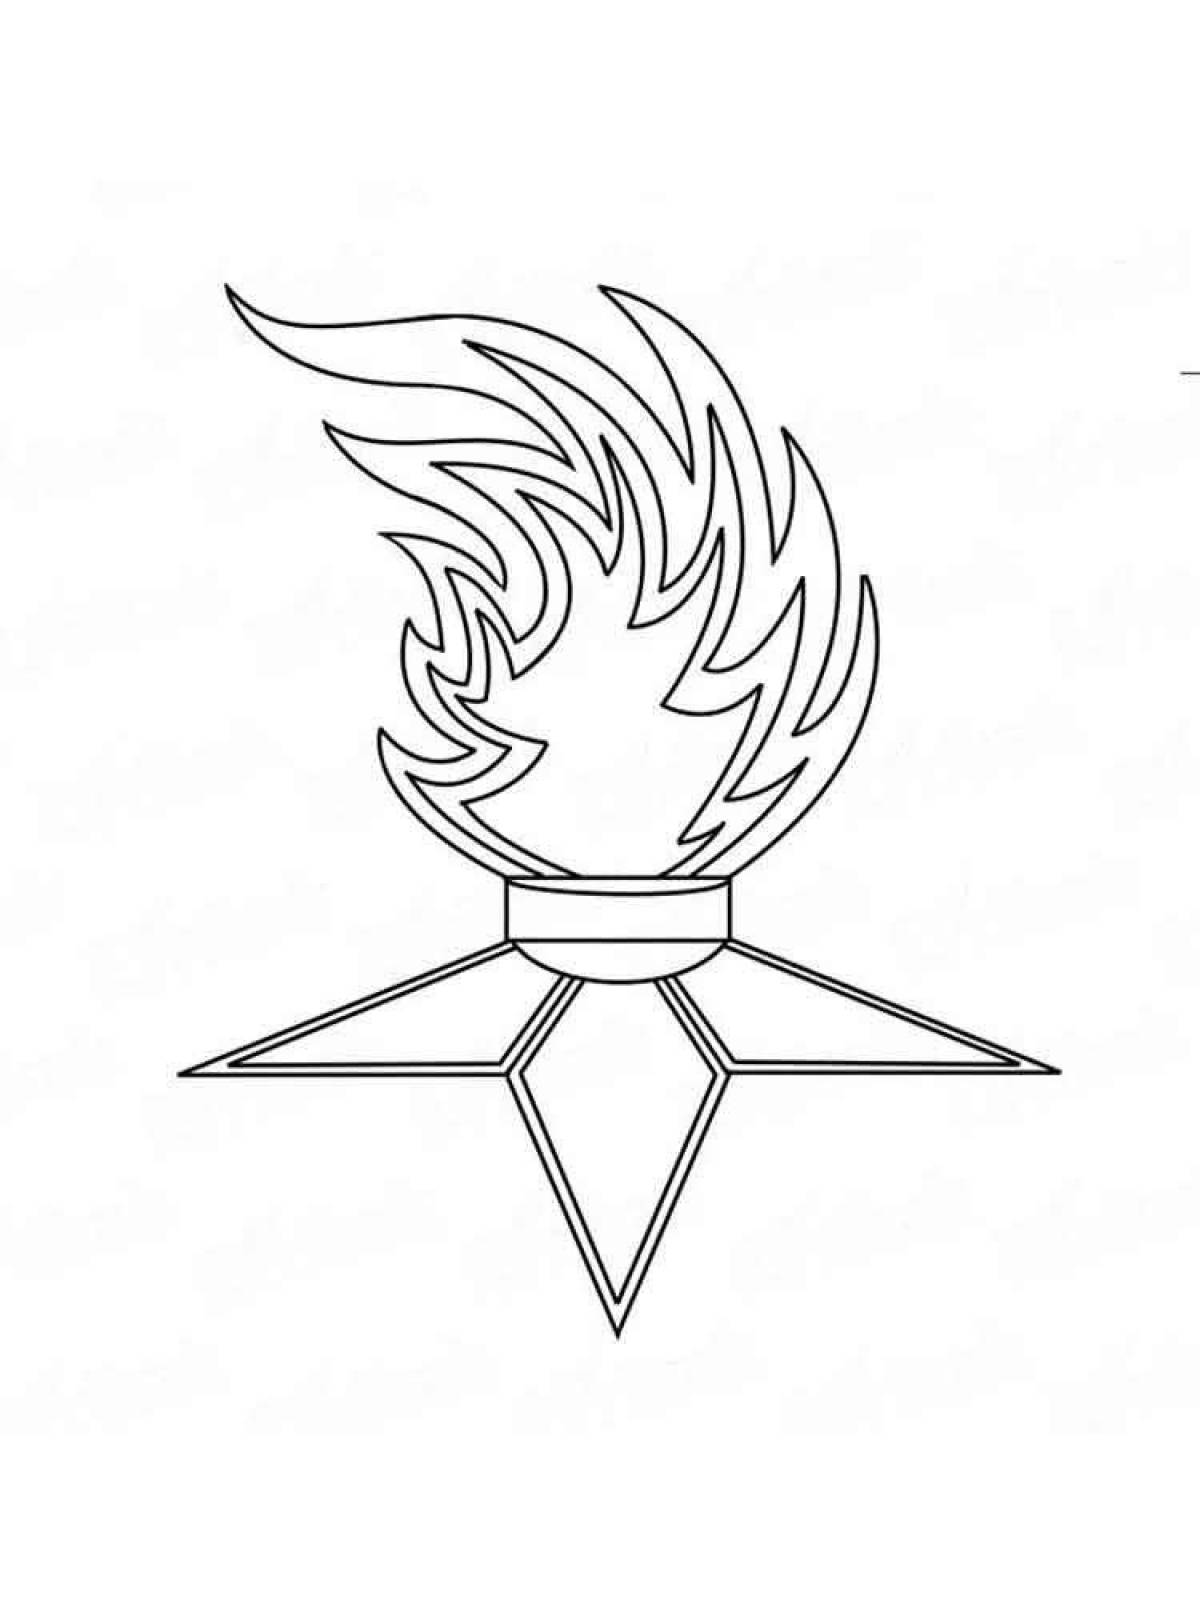 Colorful eternal flame coloring page for kids